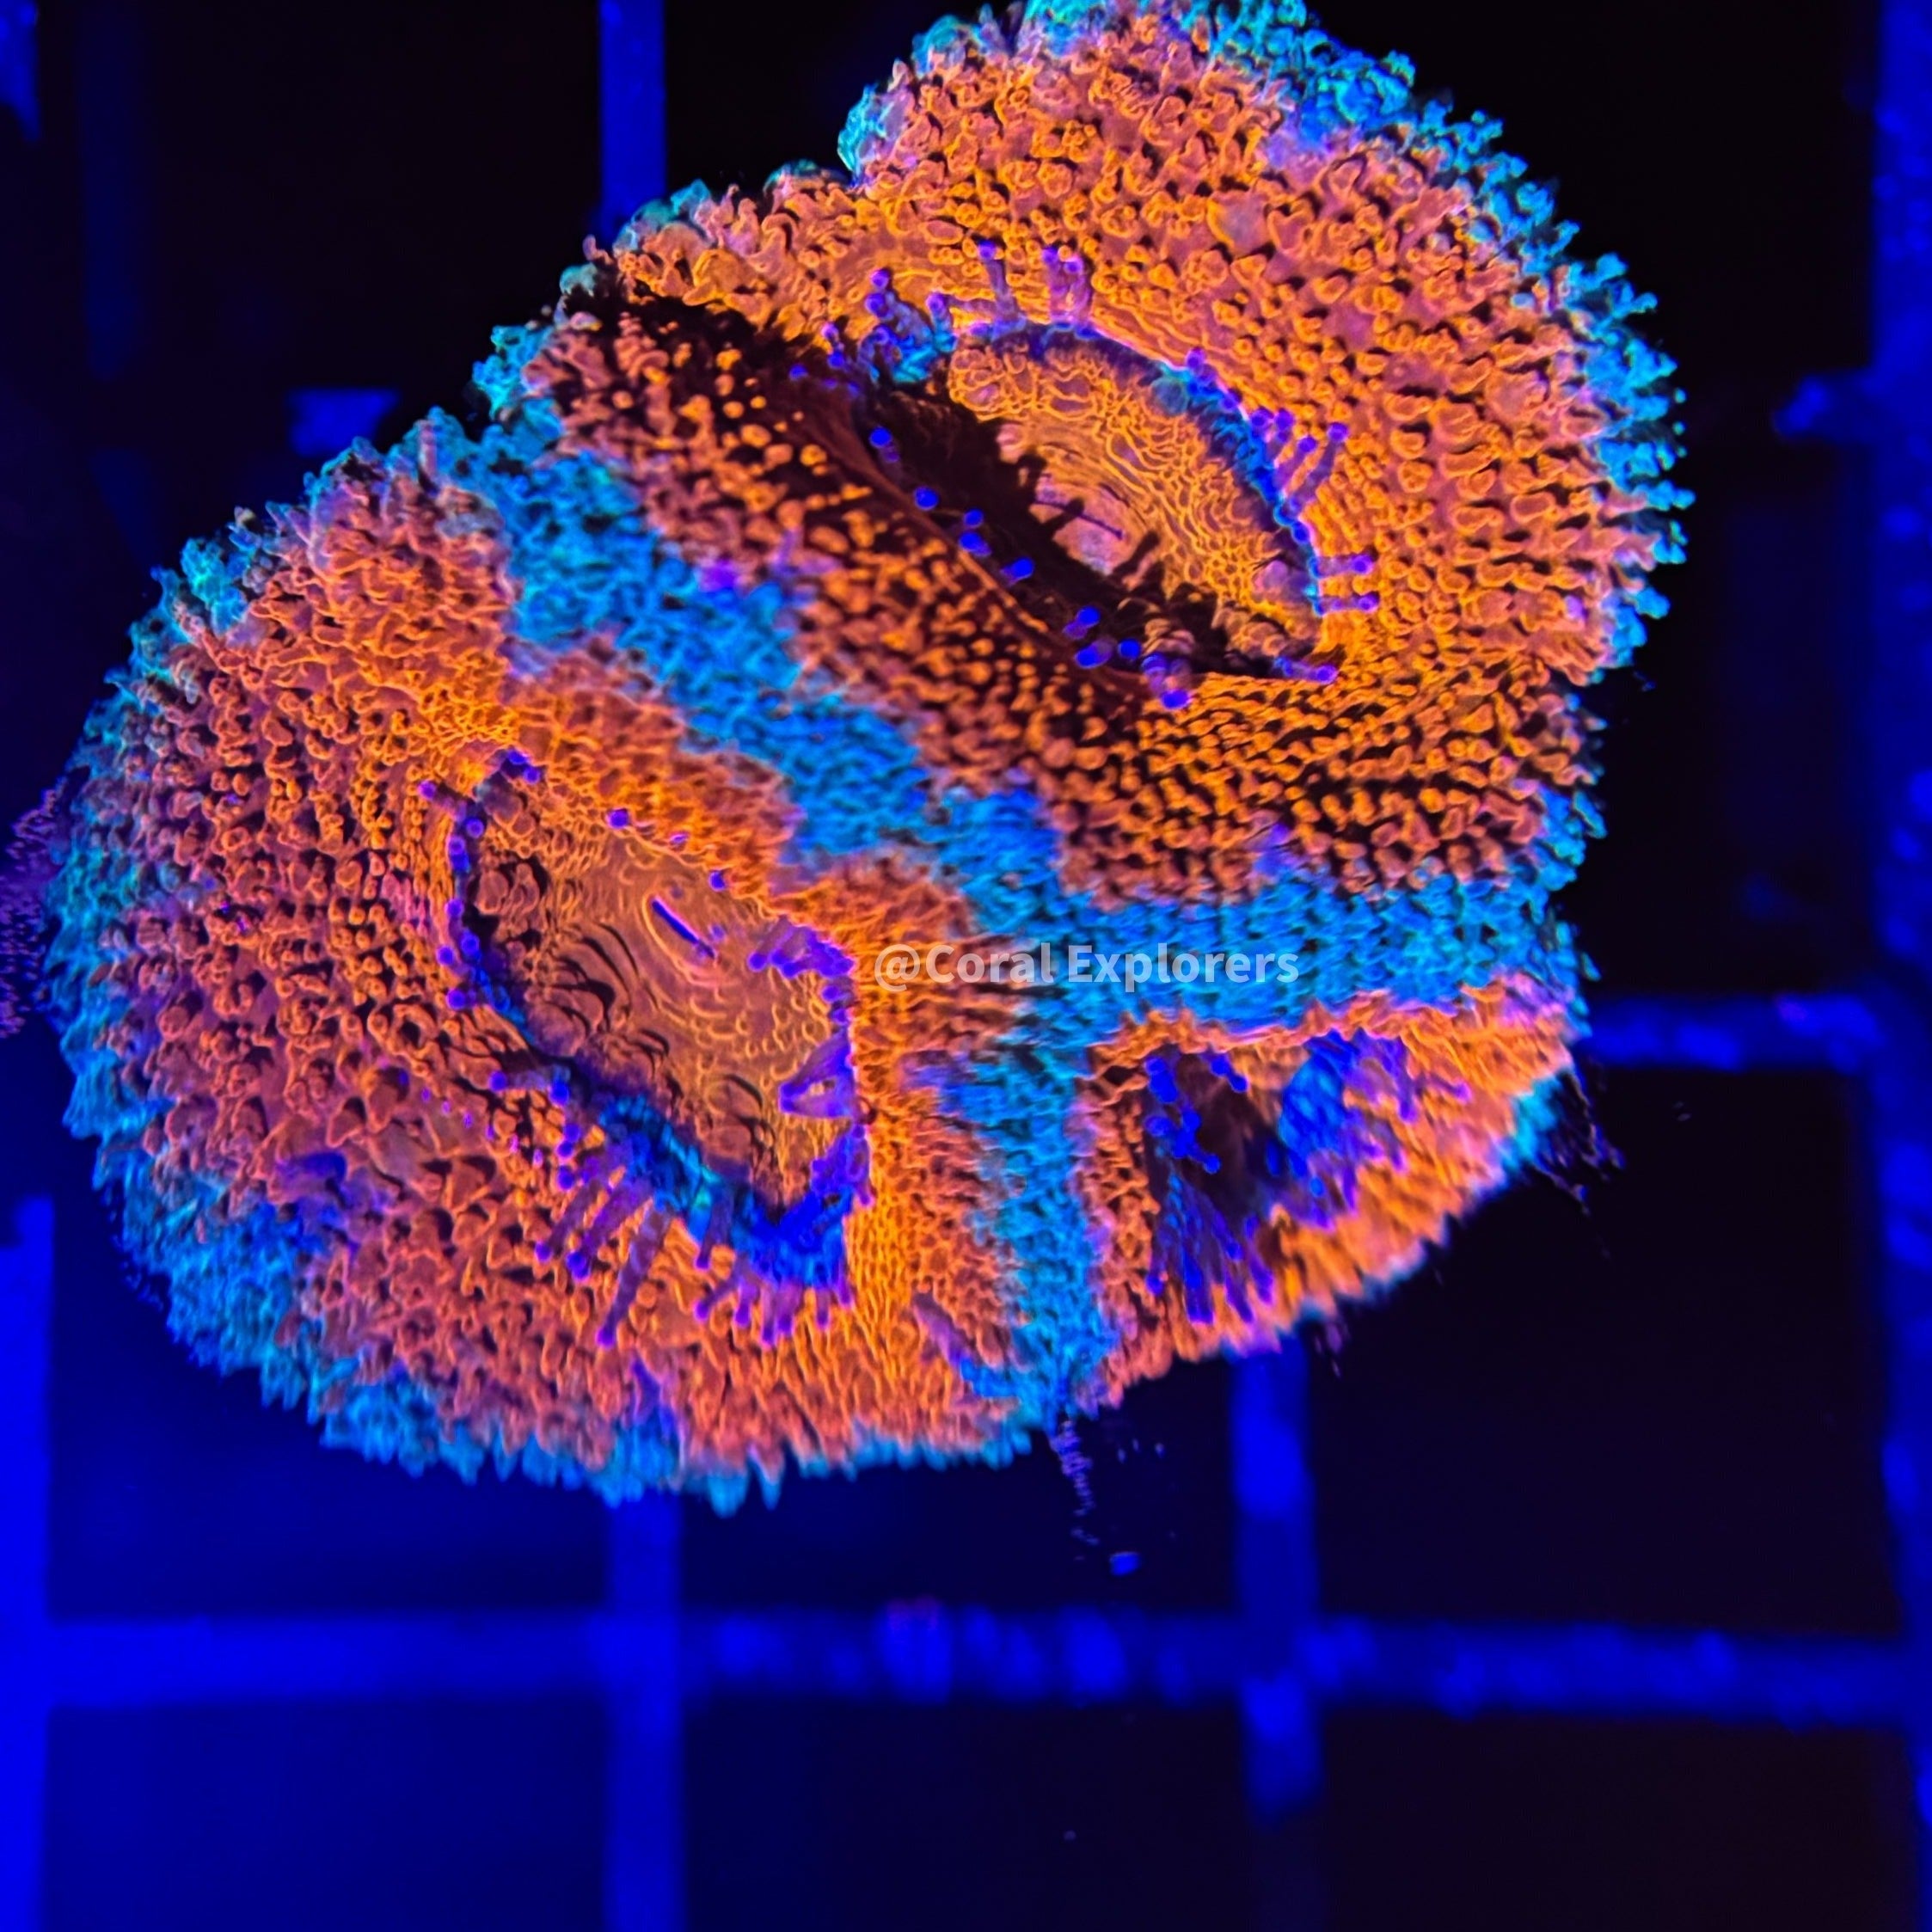 CE- WYSIWYG Tiffany Blue Acan Lord Micromussa Coral Frag LPS SPS #R1OC13